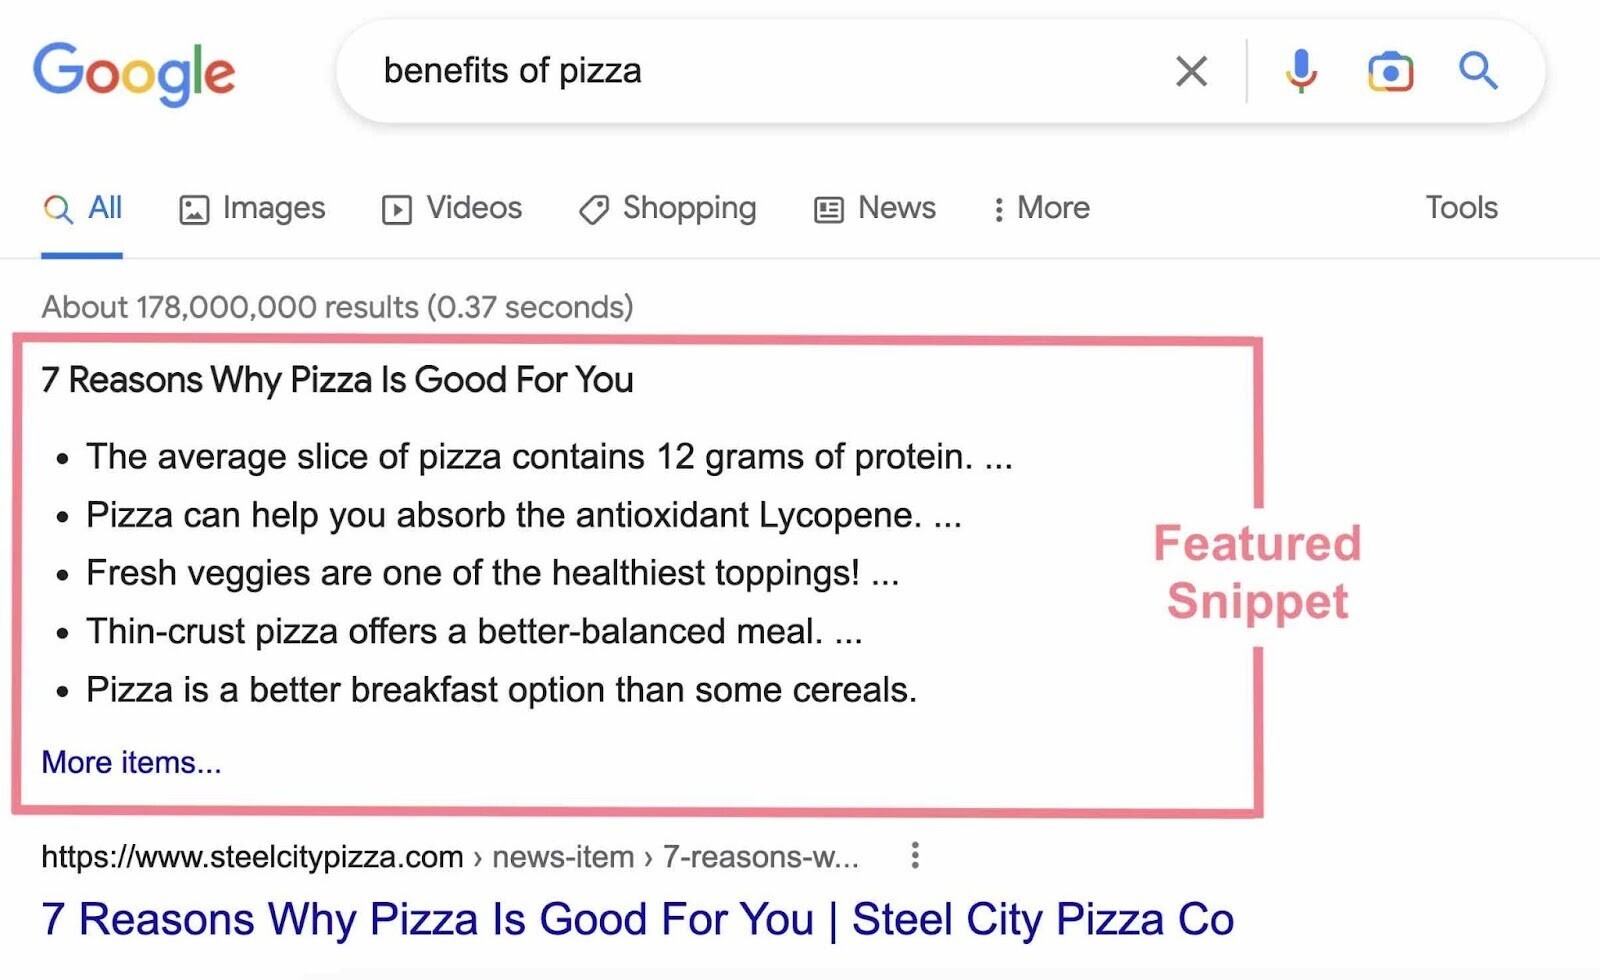 featured snippet in SERP